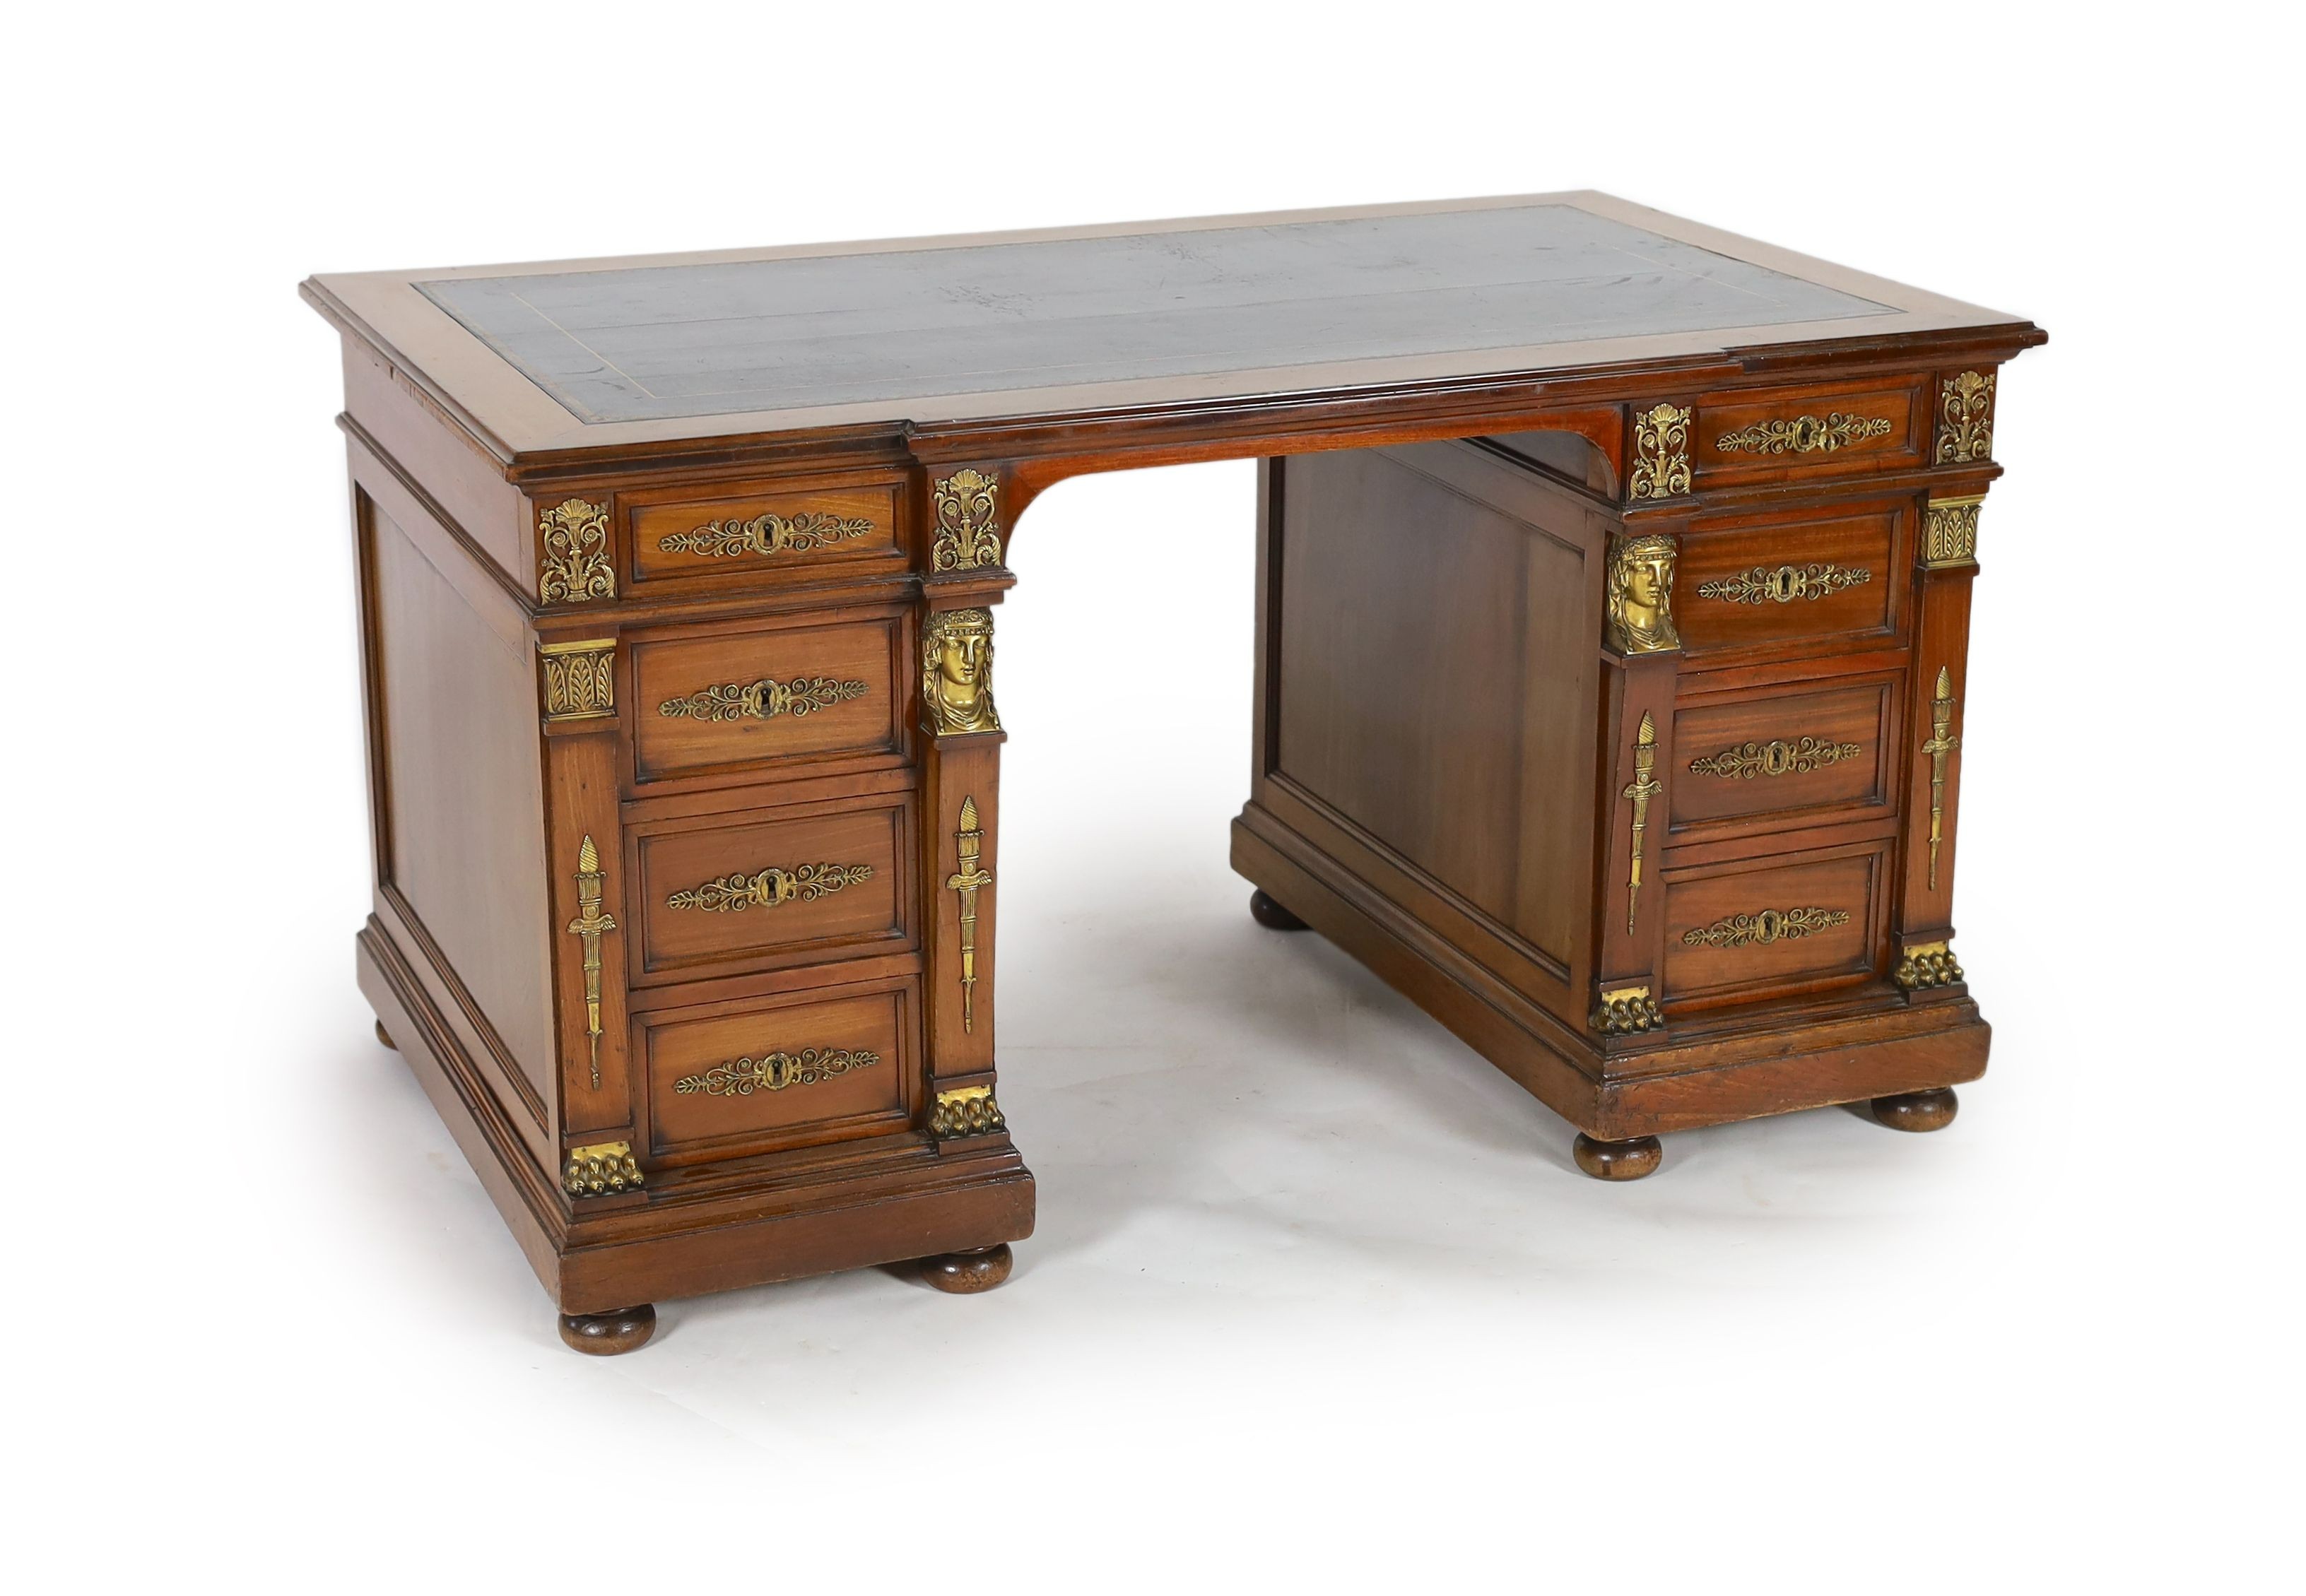 An early 20th century French classical revival mahogany breakfront pedestal desk, W.135cm D.82cm H.75cm